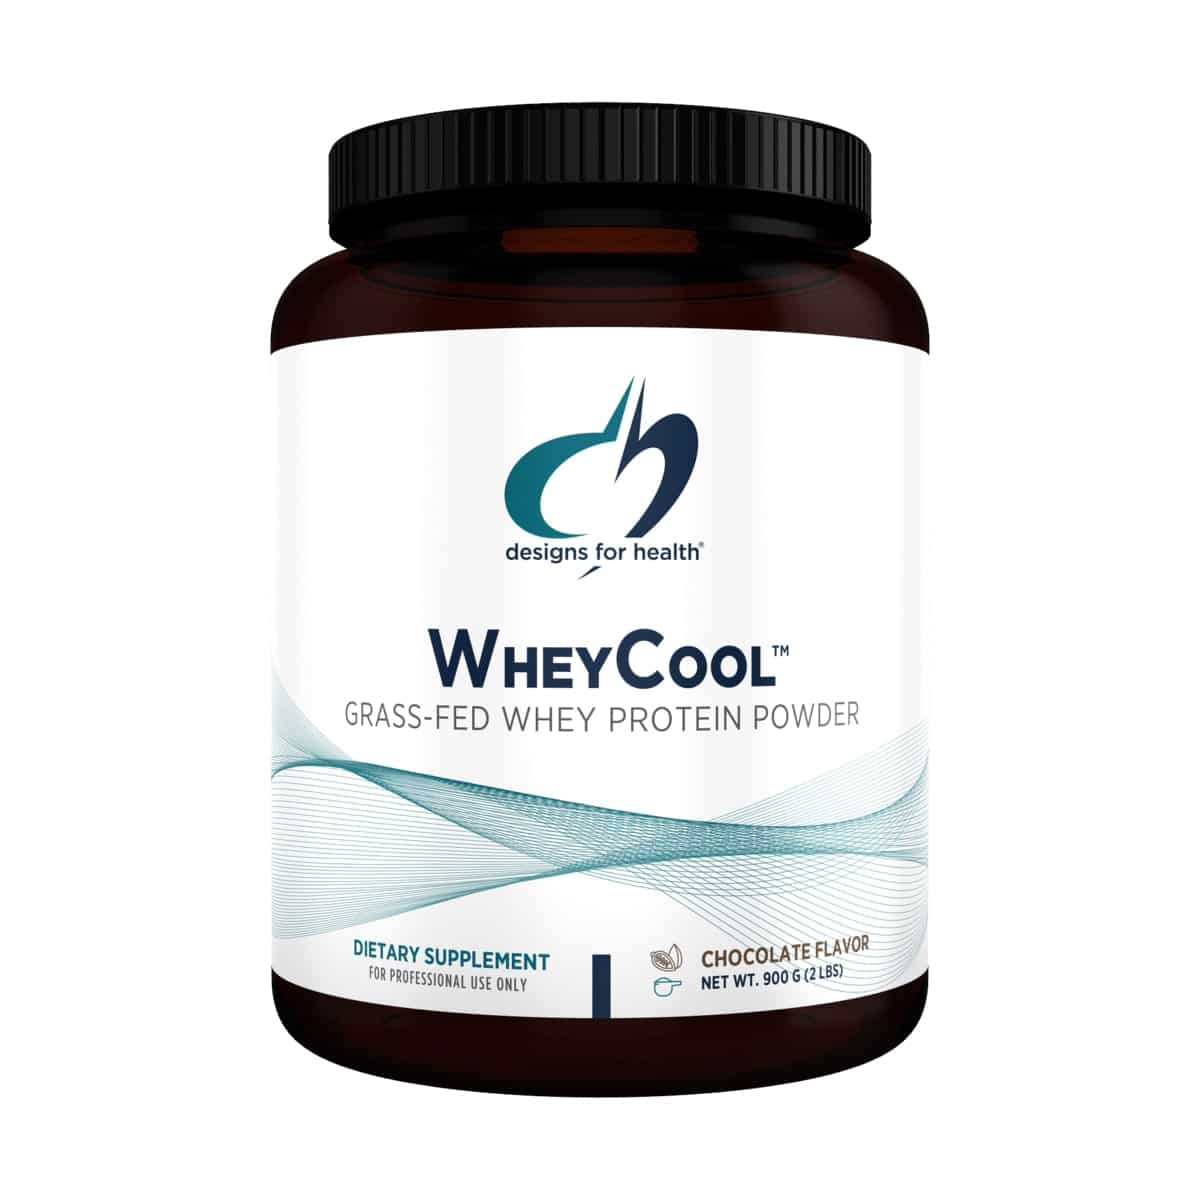 Whey Cool Natural Choc Flavor 900 gms